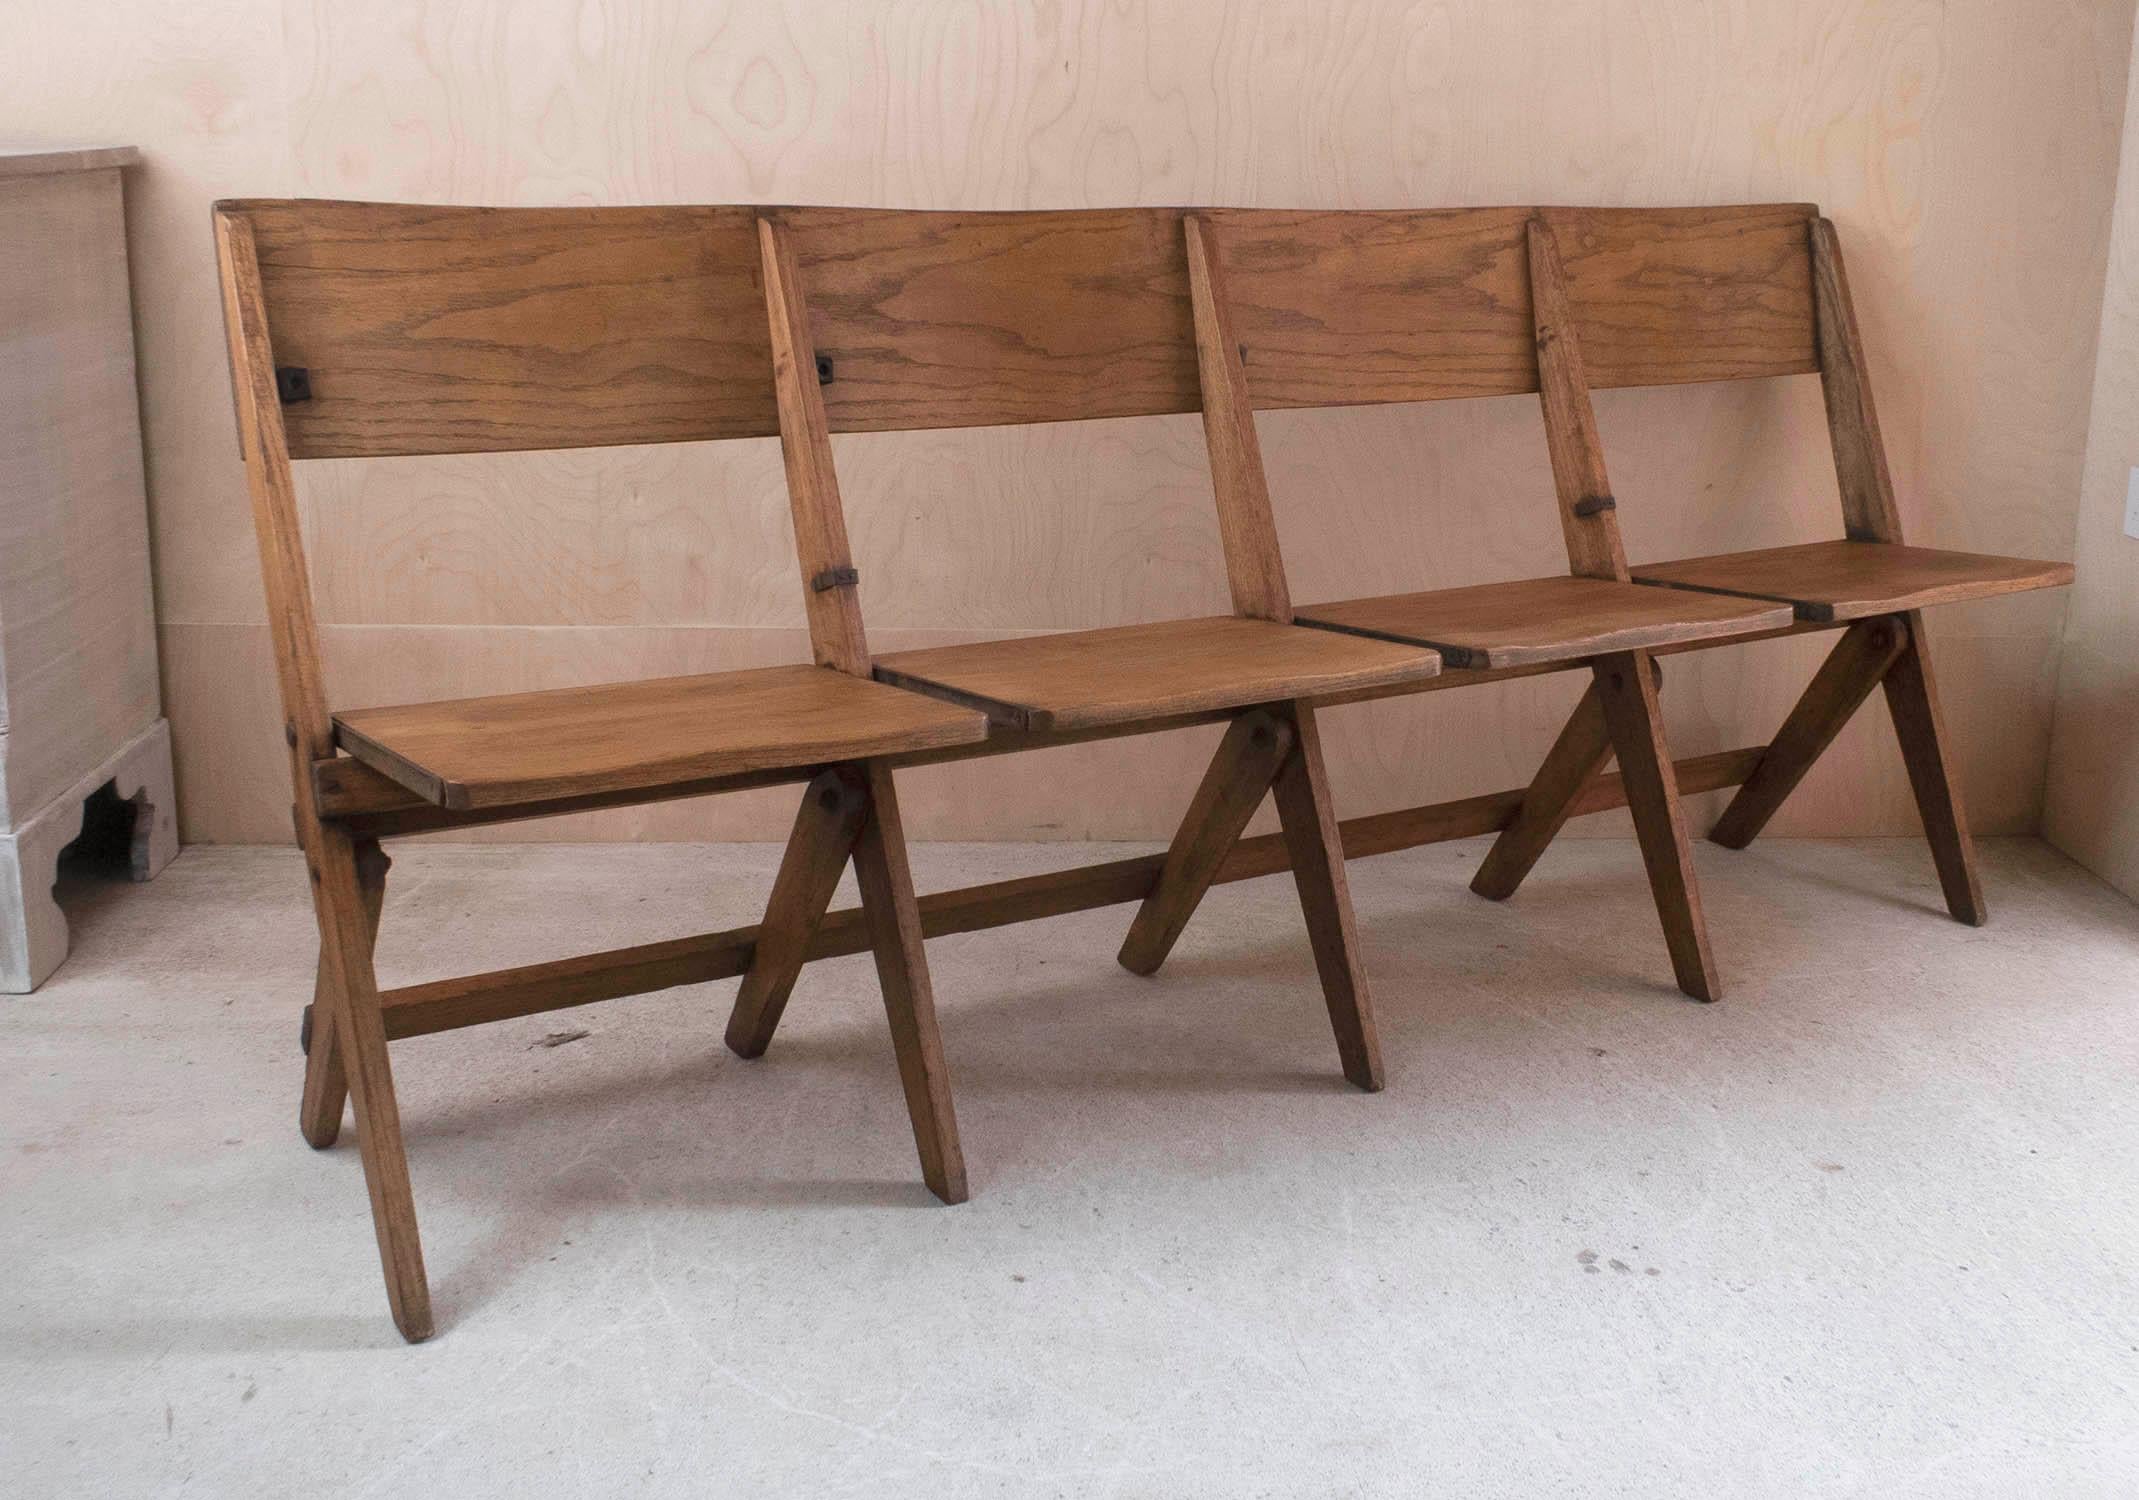 Fabulous folding bench

Original patina. Nice colour of oak

I particularly like the side profile. It reminds me of the Jeanneret Chandigarh chair.

Good condition. Sturdy construction

Free UK shipping